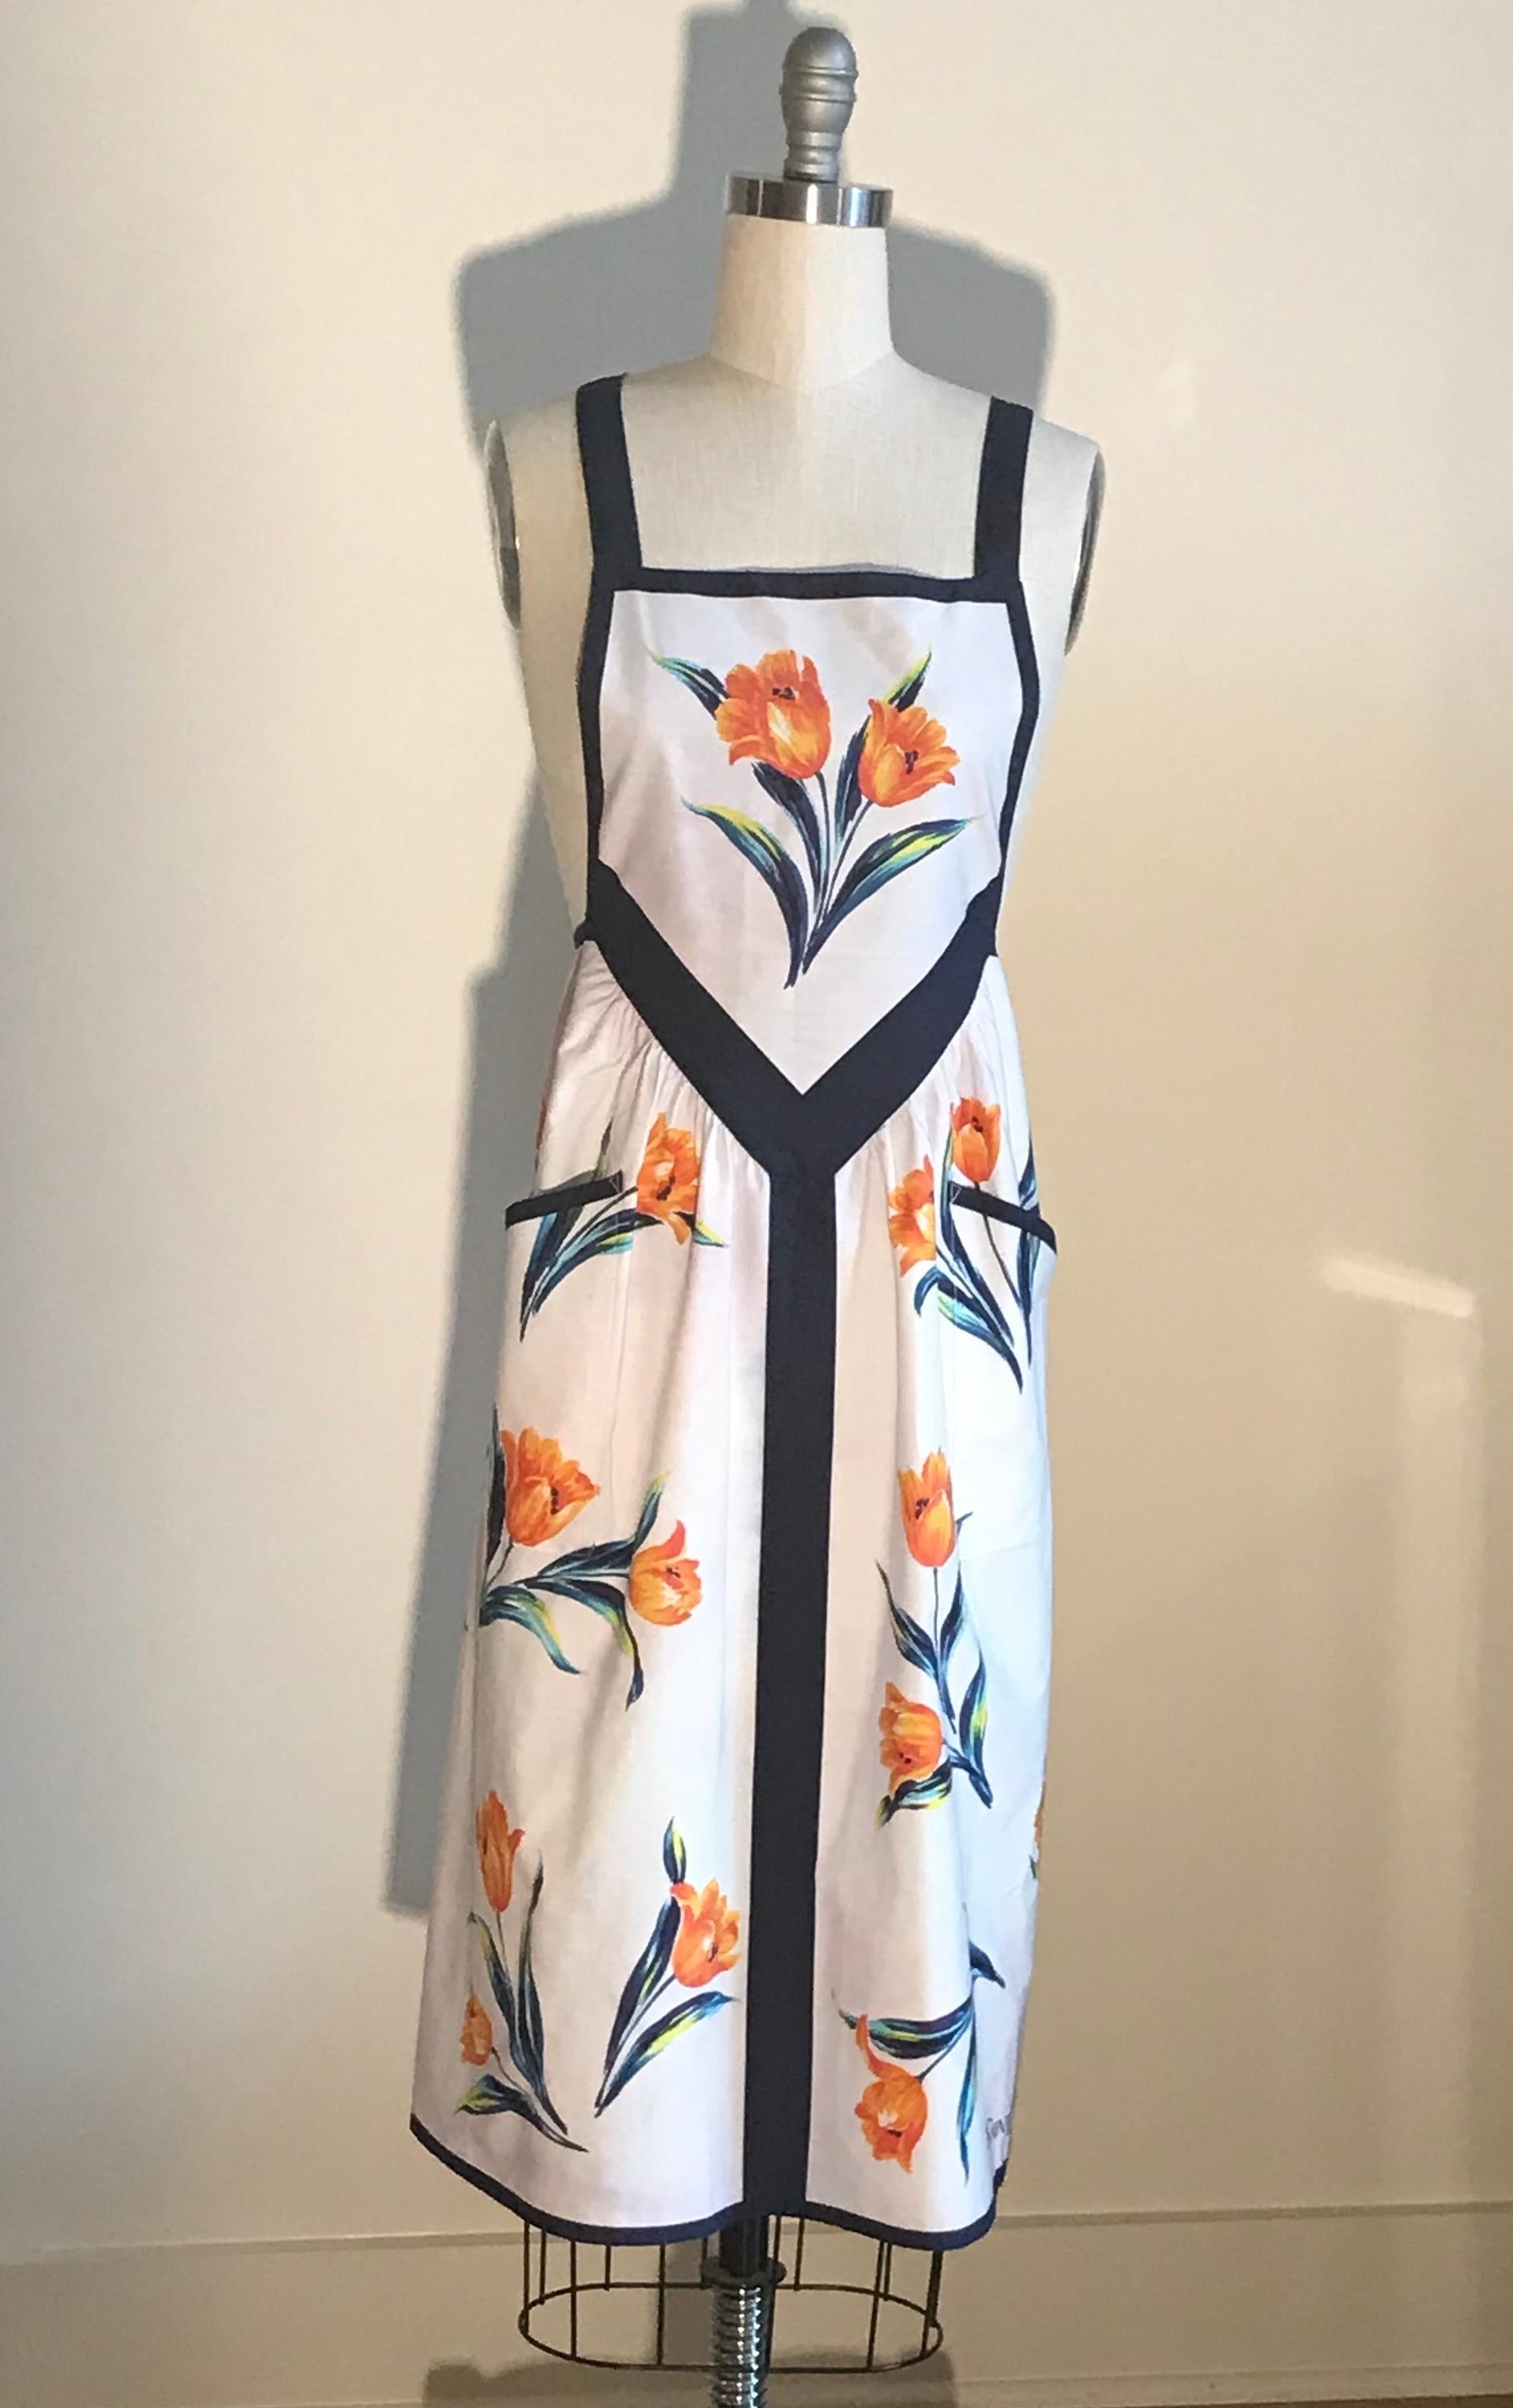 Vintage Yves Saint Laurent apron by the Japanese Apron Association. White apron with orange blue floral print throughout. Yves Saint Laurent logo at side bottom. Criss cross straps button at back. Back tie. 

Could be worn as an apron, or even worn